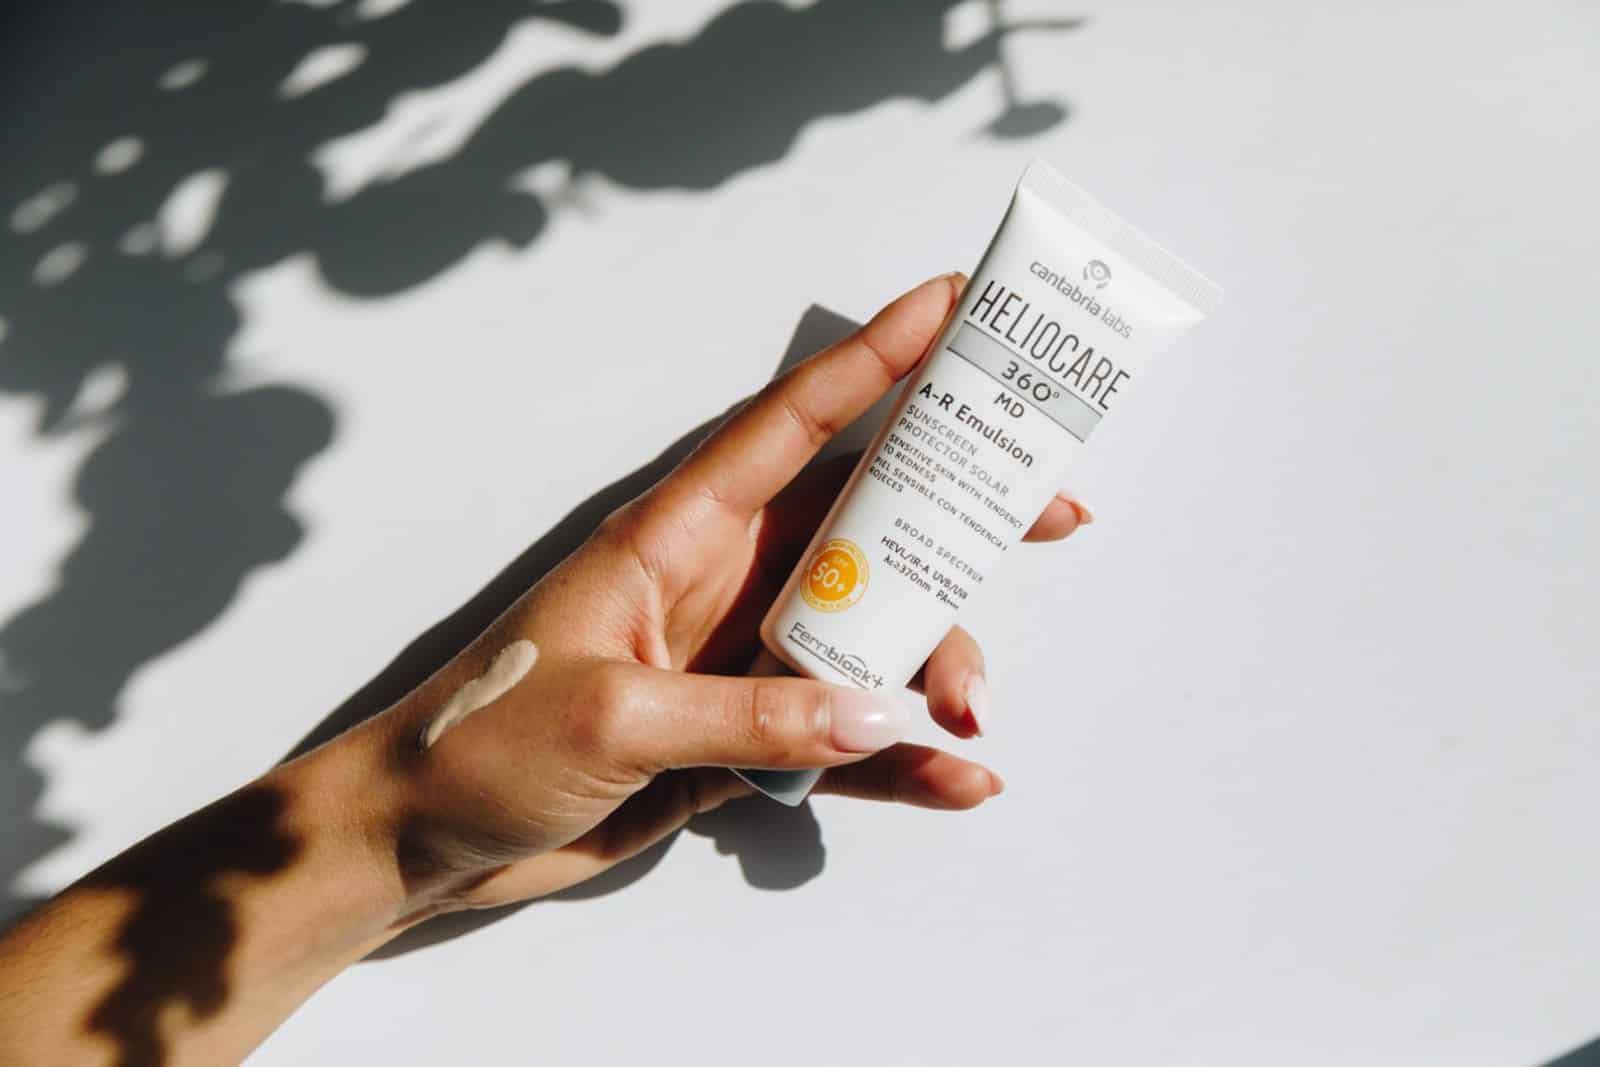 The Heliocare Mineral Sunscreen for Rosacea-Prone Skin